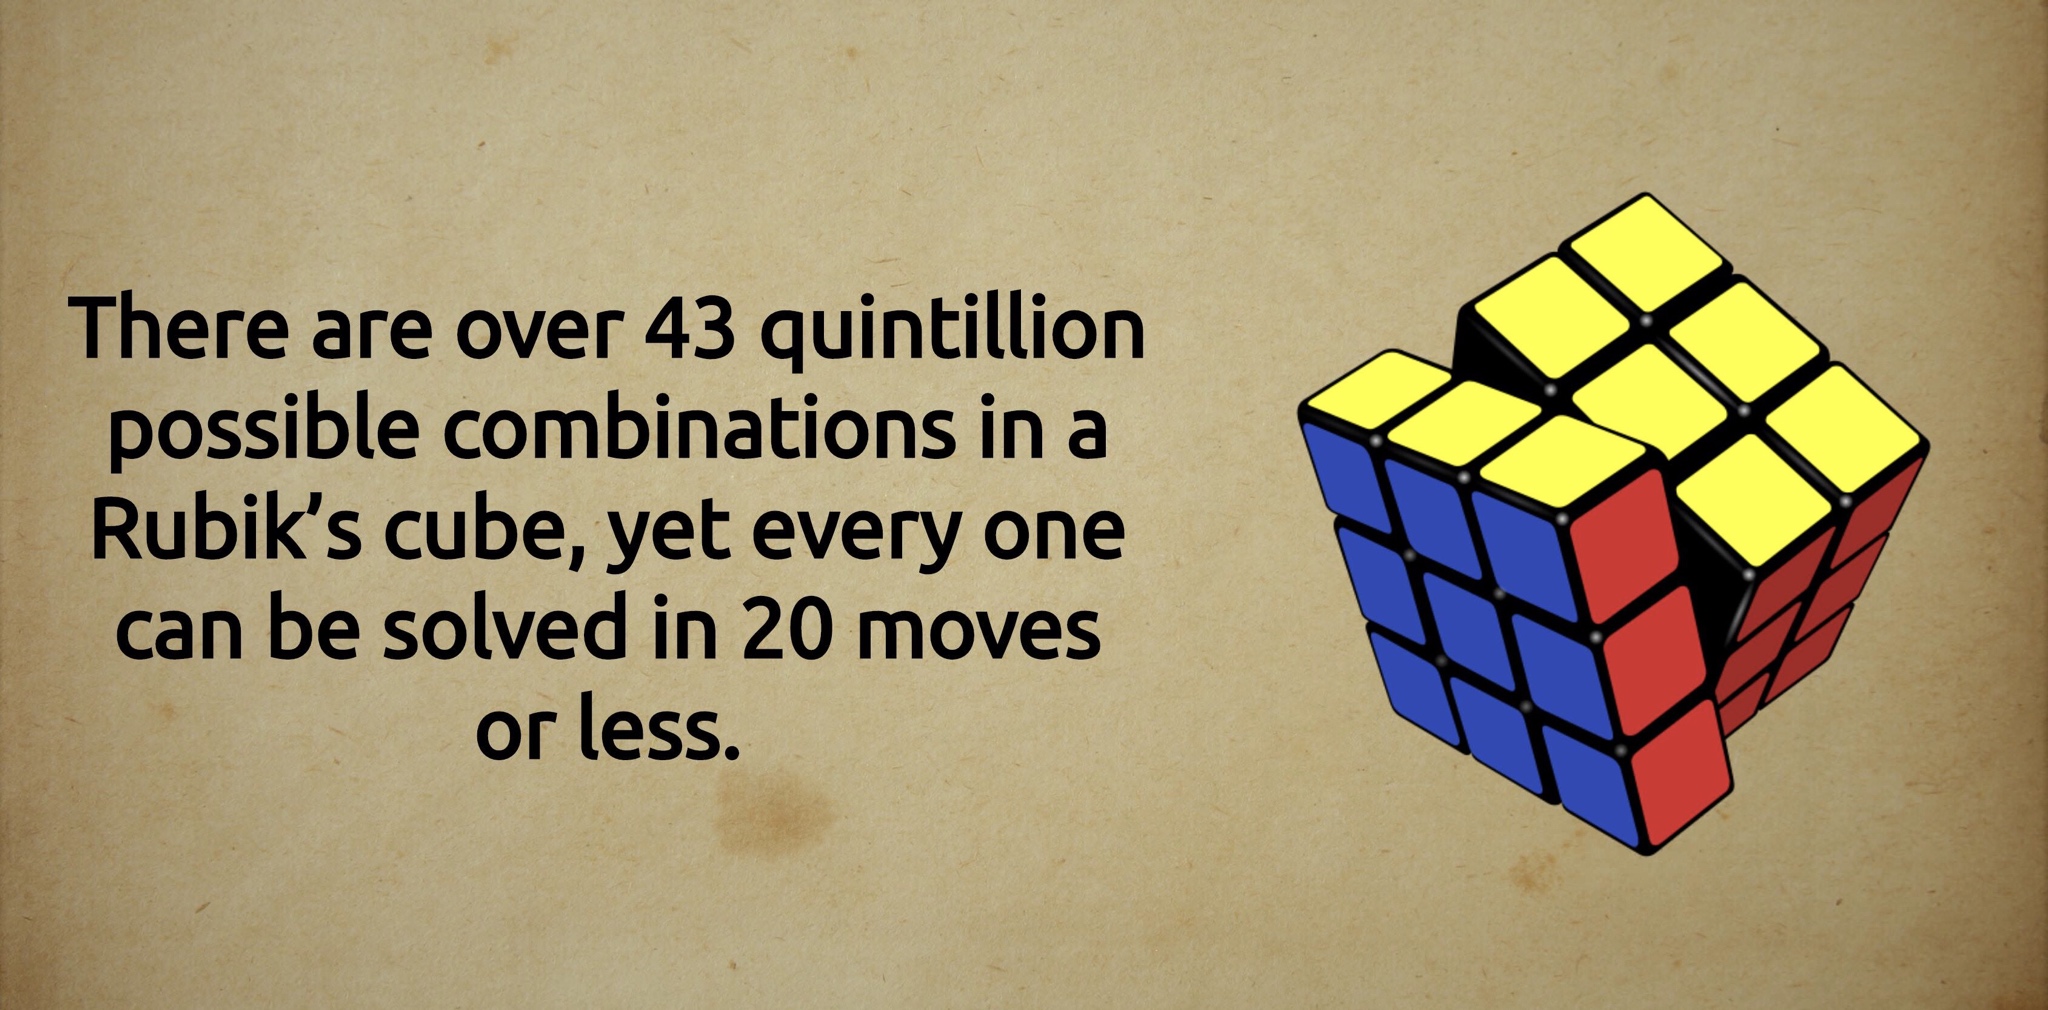 rubik's cube - There are over 43 quintillion possible combinations in a Rubik's cube, yet every one can be solved in 20 moves or less.